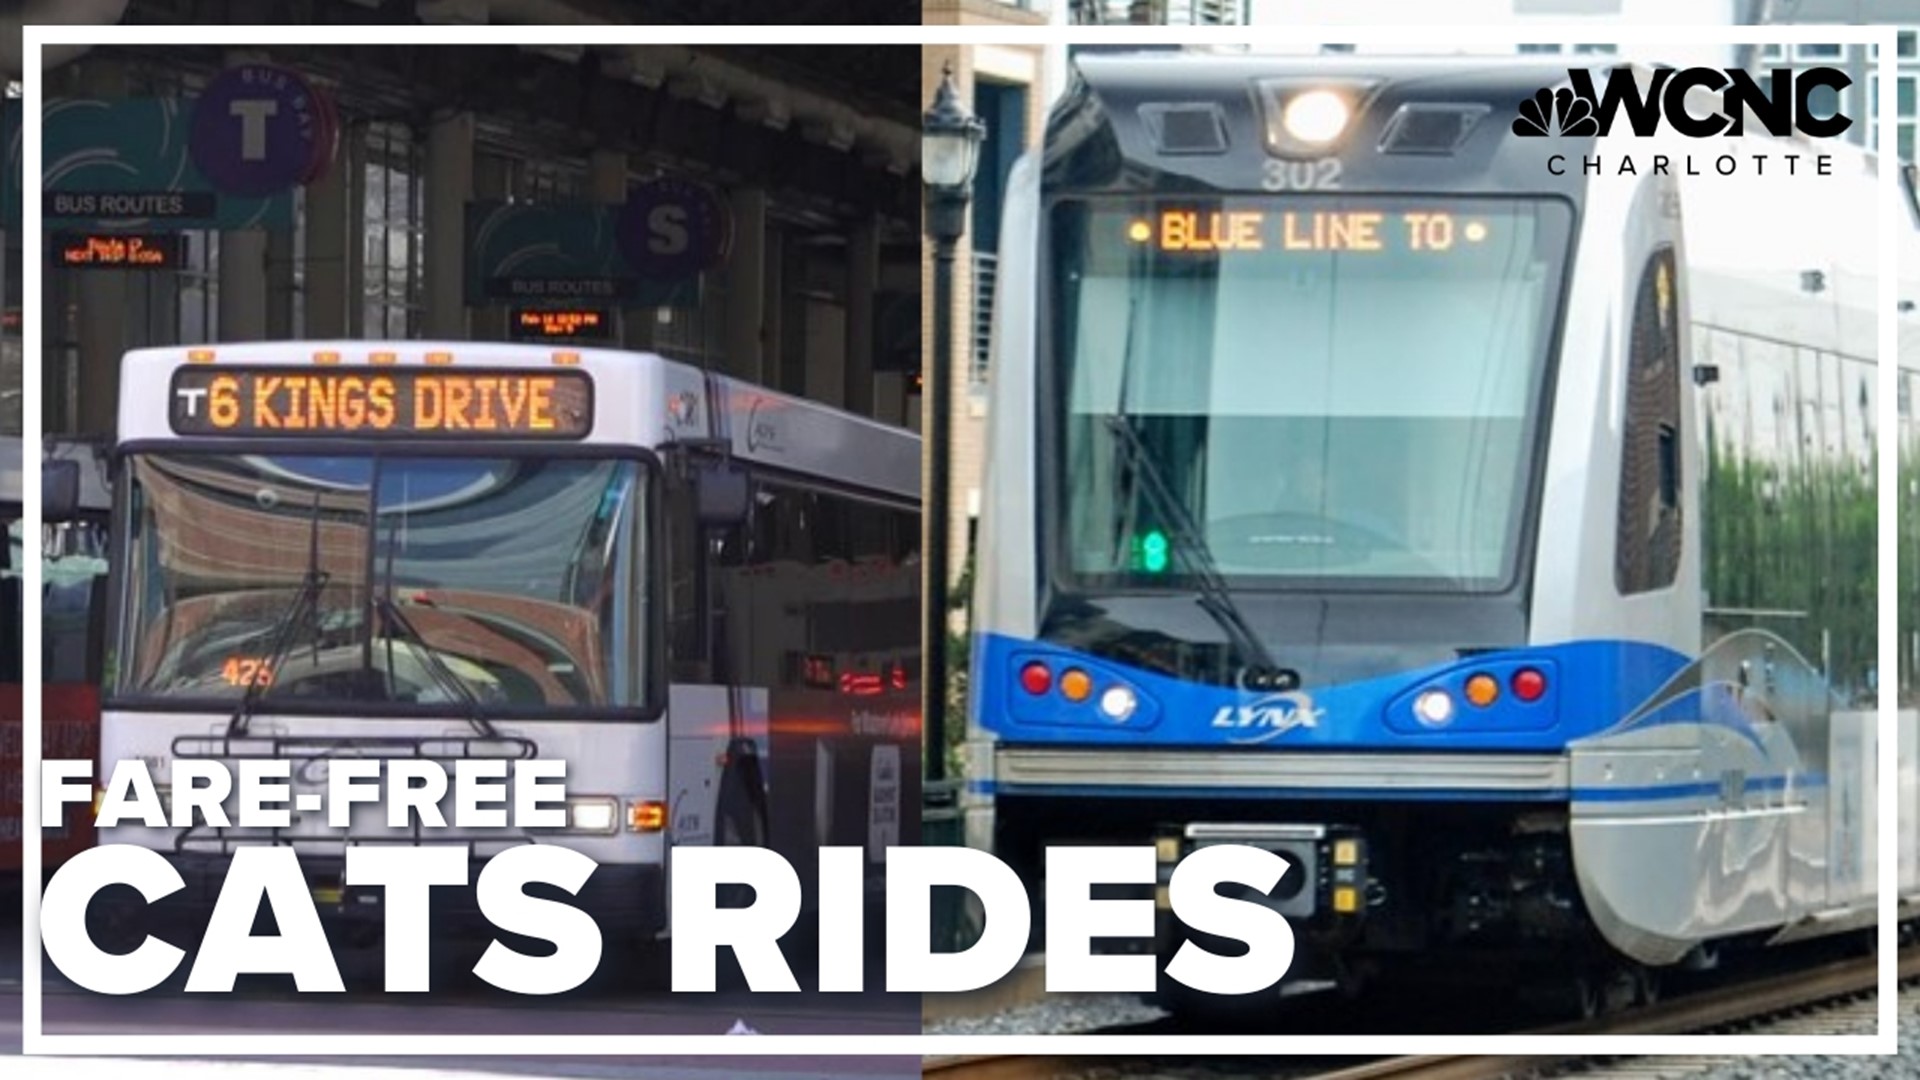 In honor or Rosa Parks' birthday, CATS will be offering free rides this Saturday.